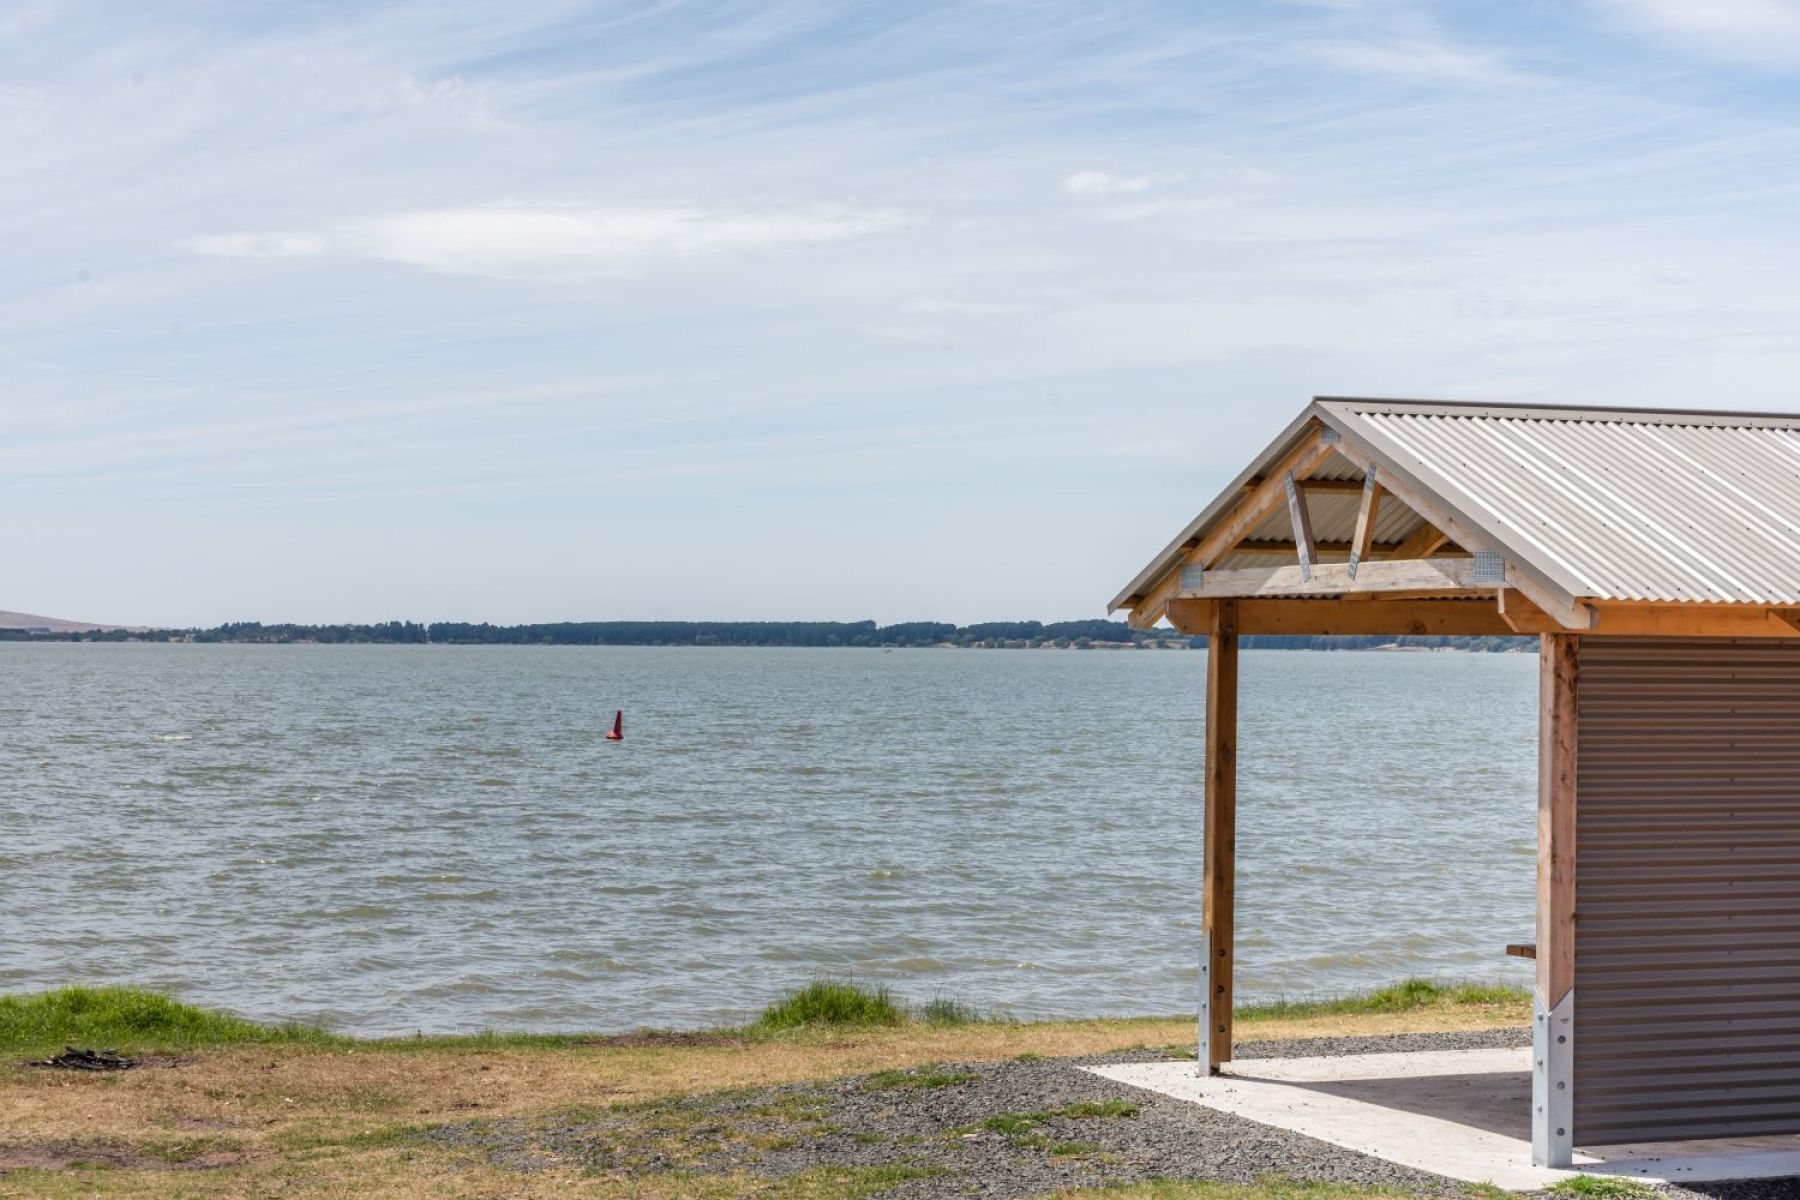 A picnic shelter looking out over a lake.